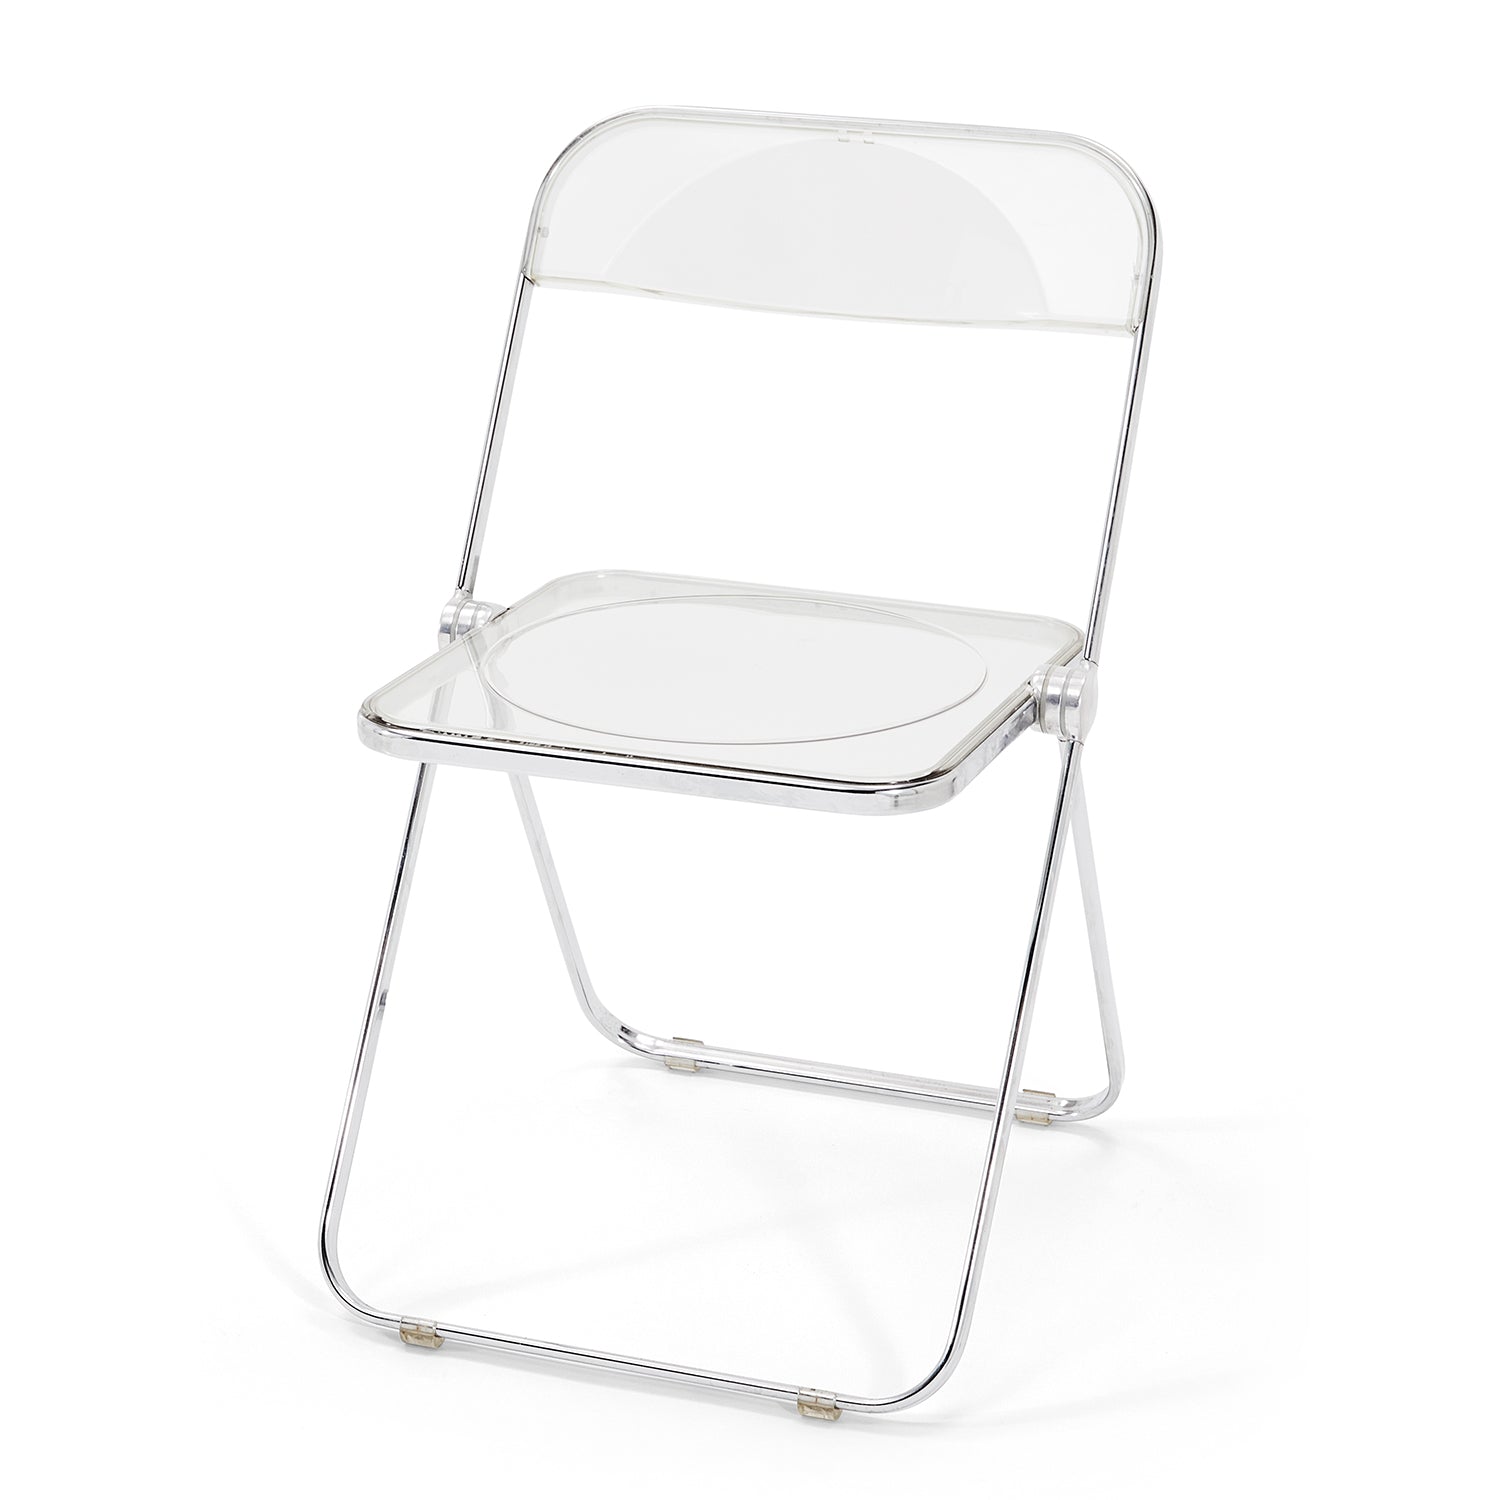 Lucite And Chrome Plia Folding Chair Modernica Props